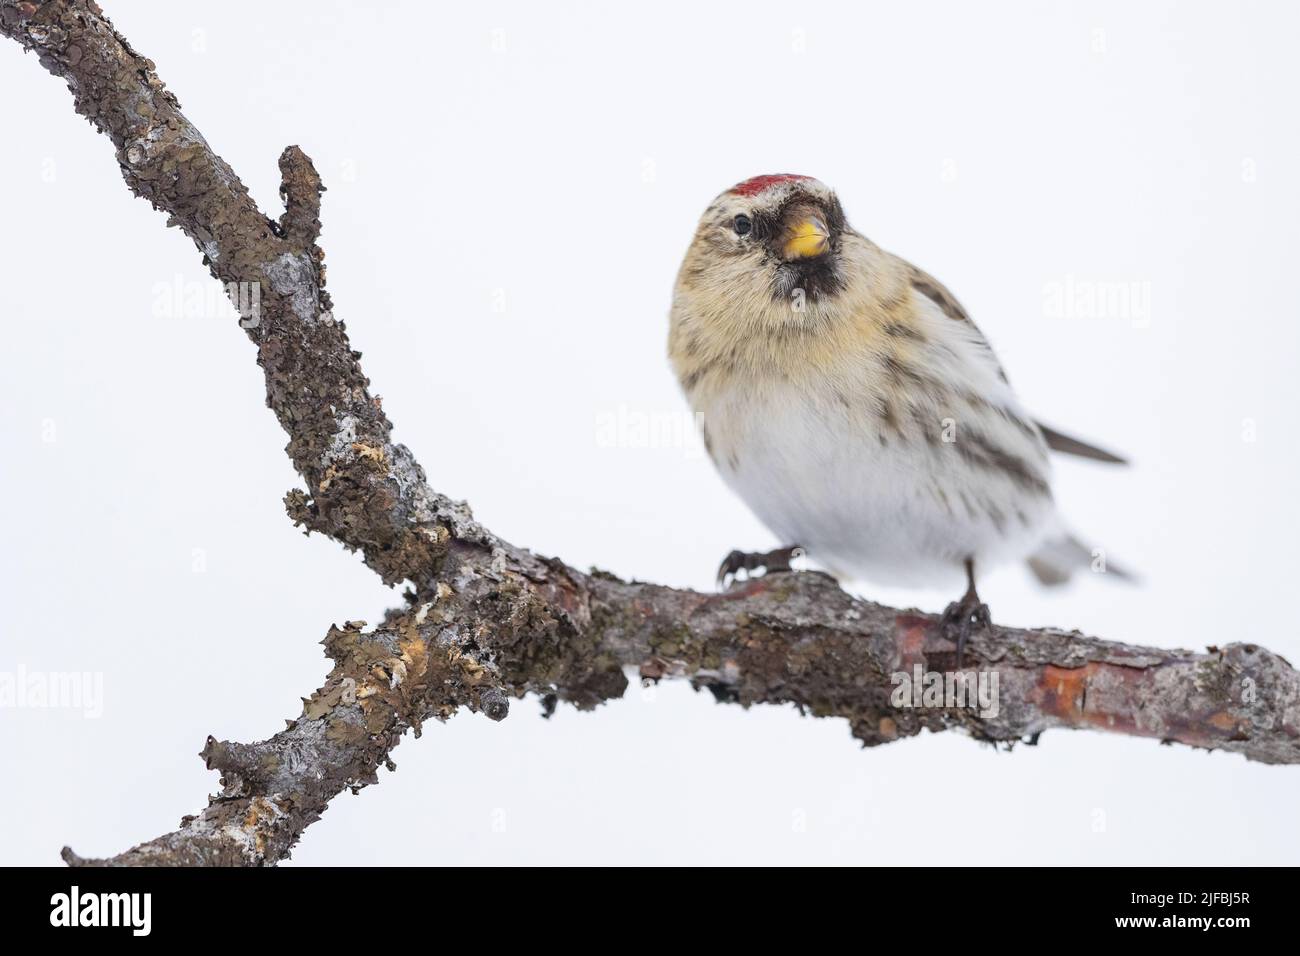 Norway, Varanger Fjord, Vadso, Common redpoll (Acanthis flammea), in the snow Stock Photo